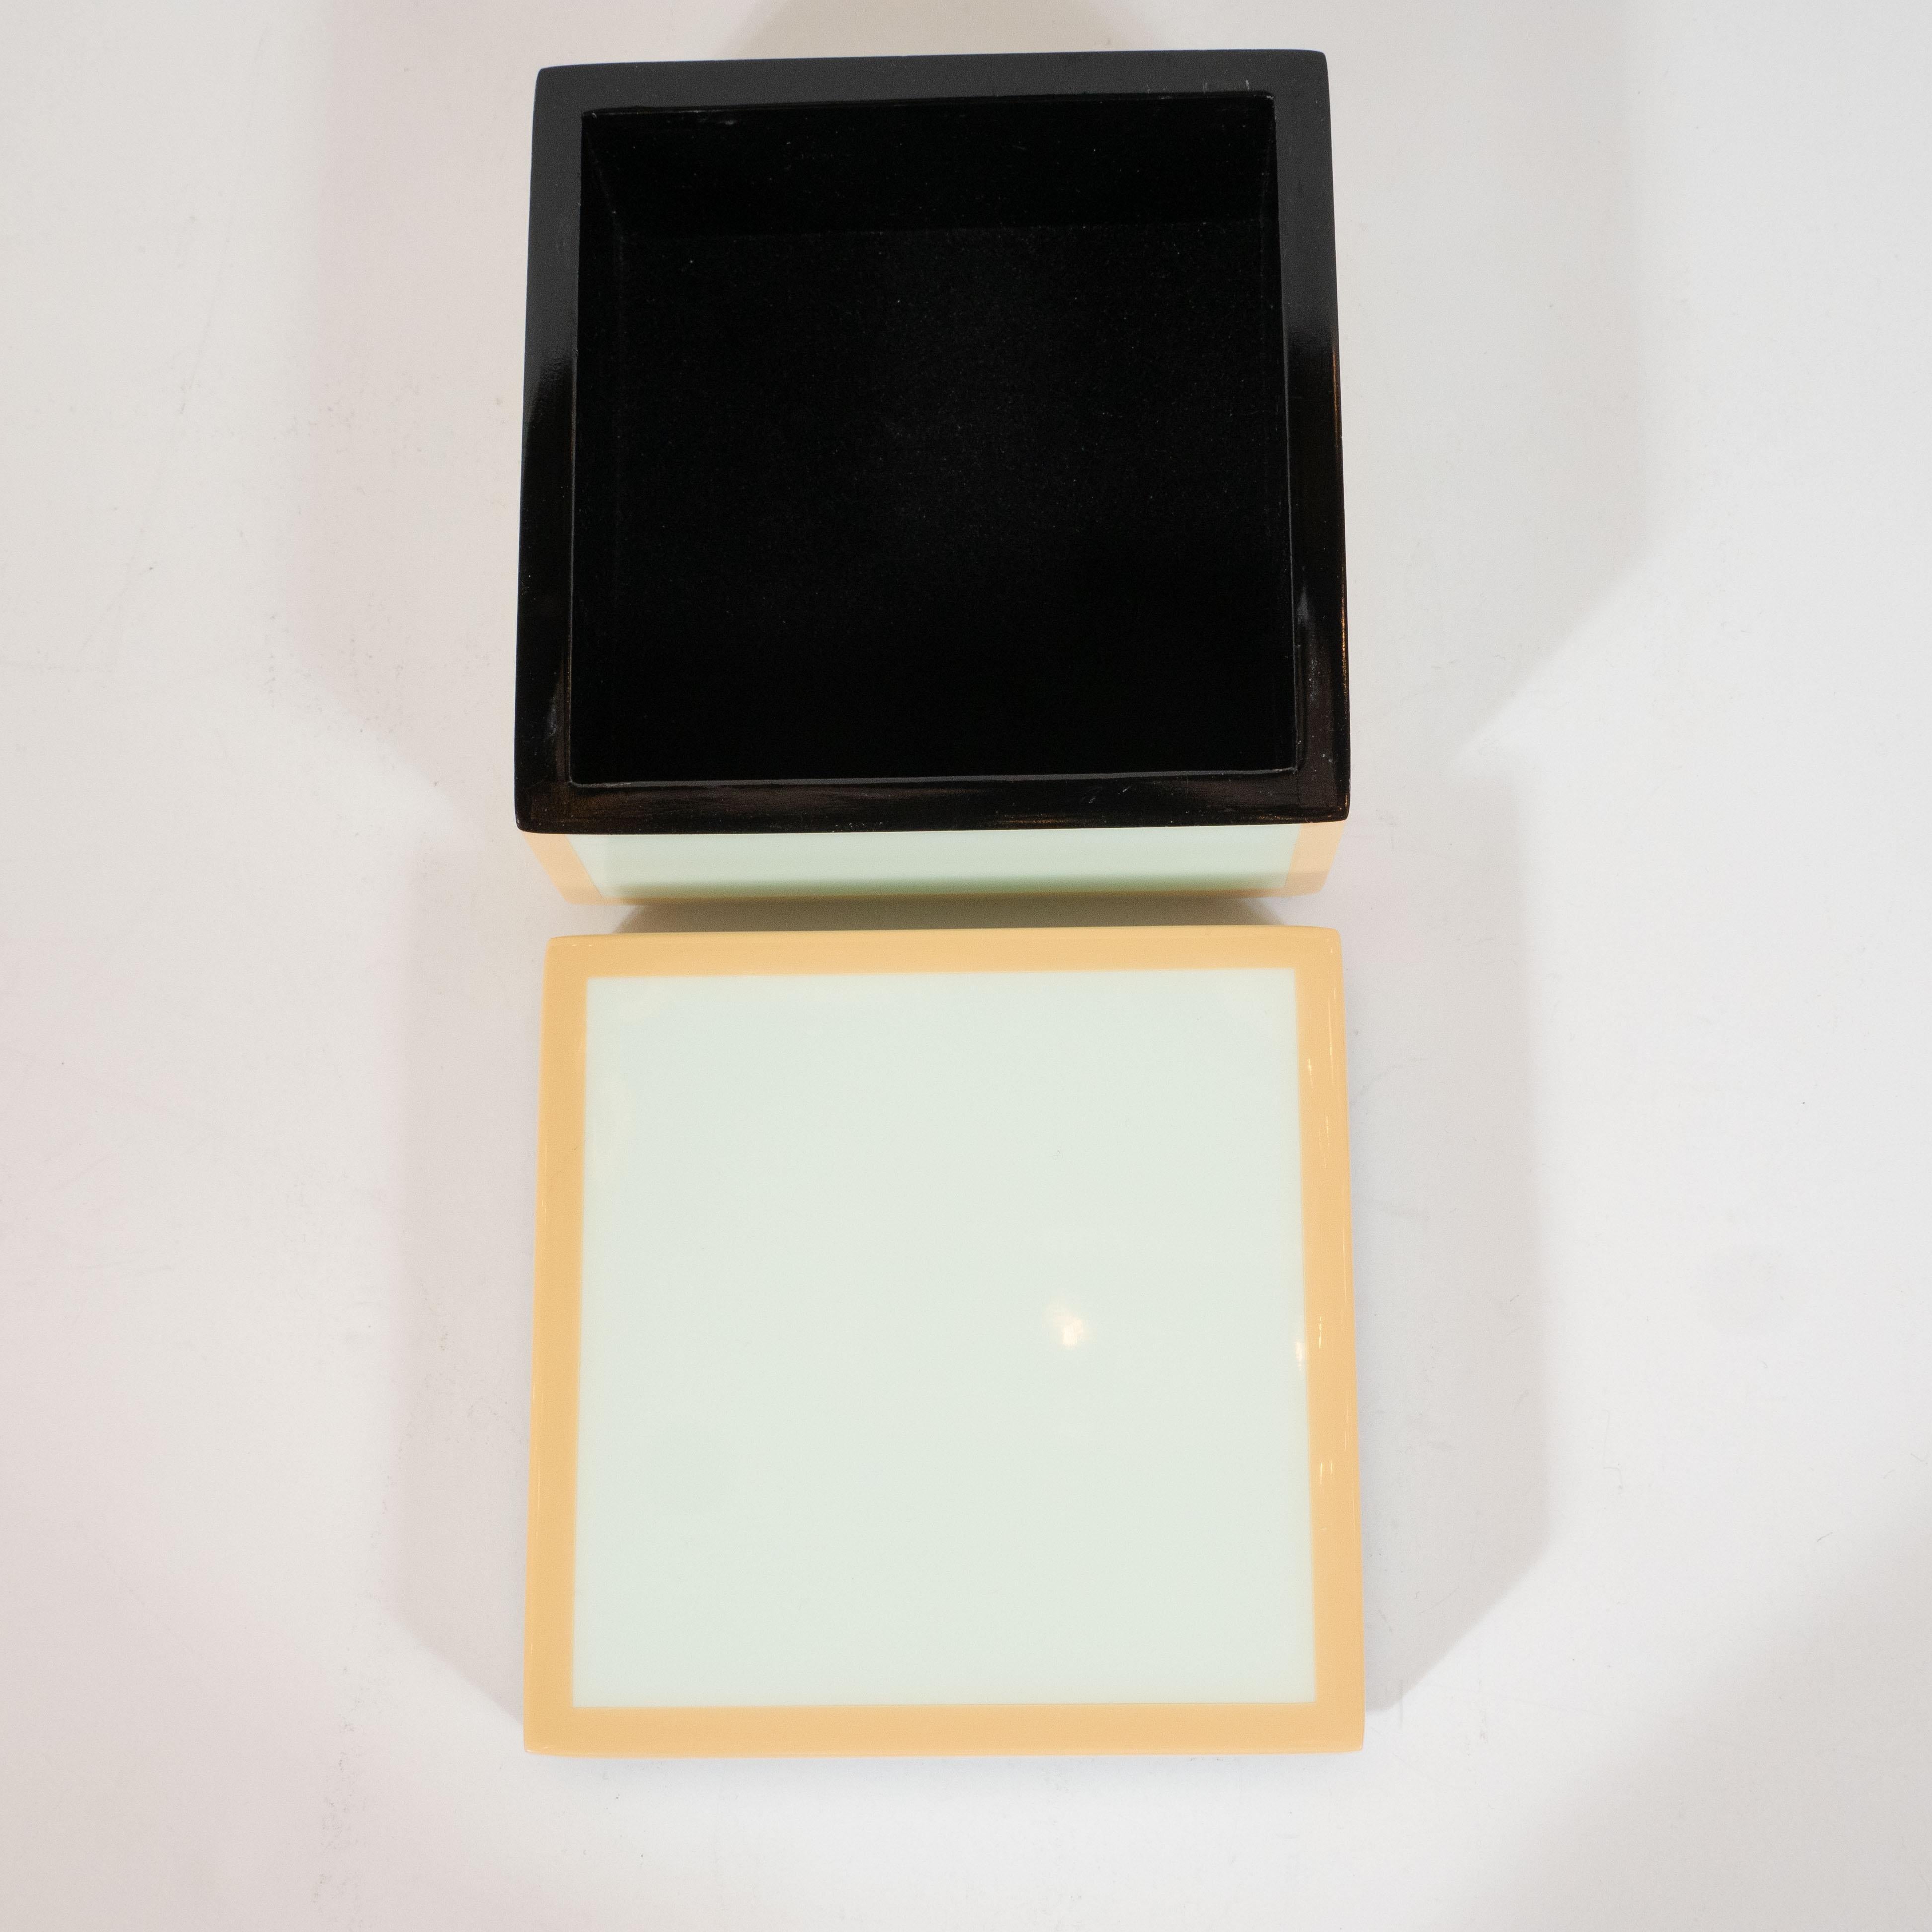 Fruitwood Modernist Square Lacquered Square Box in Pale Celadon with Tan Accents